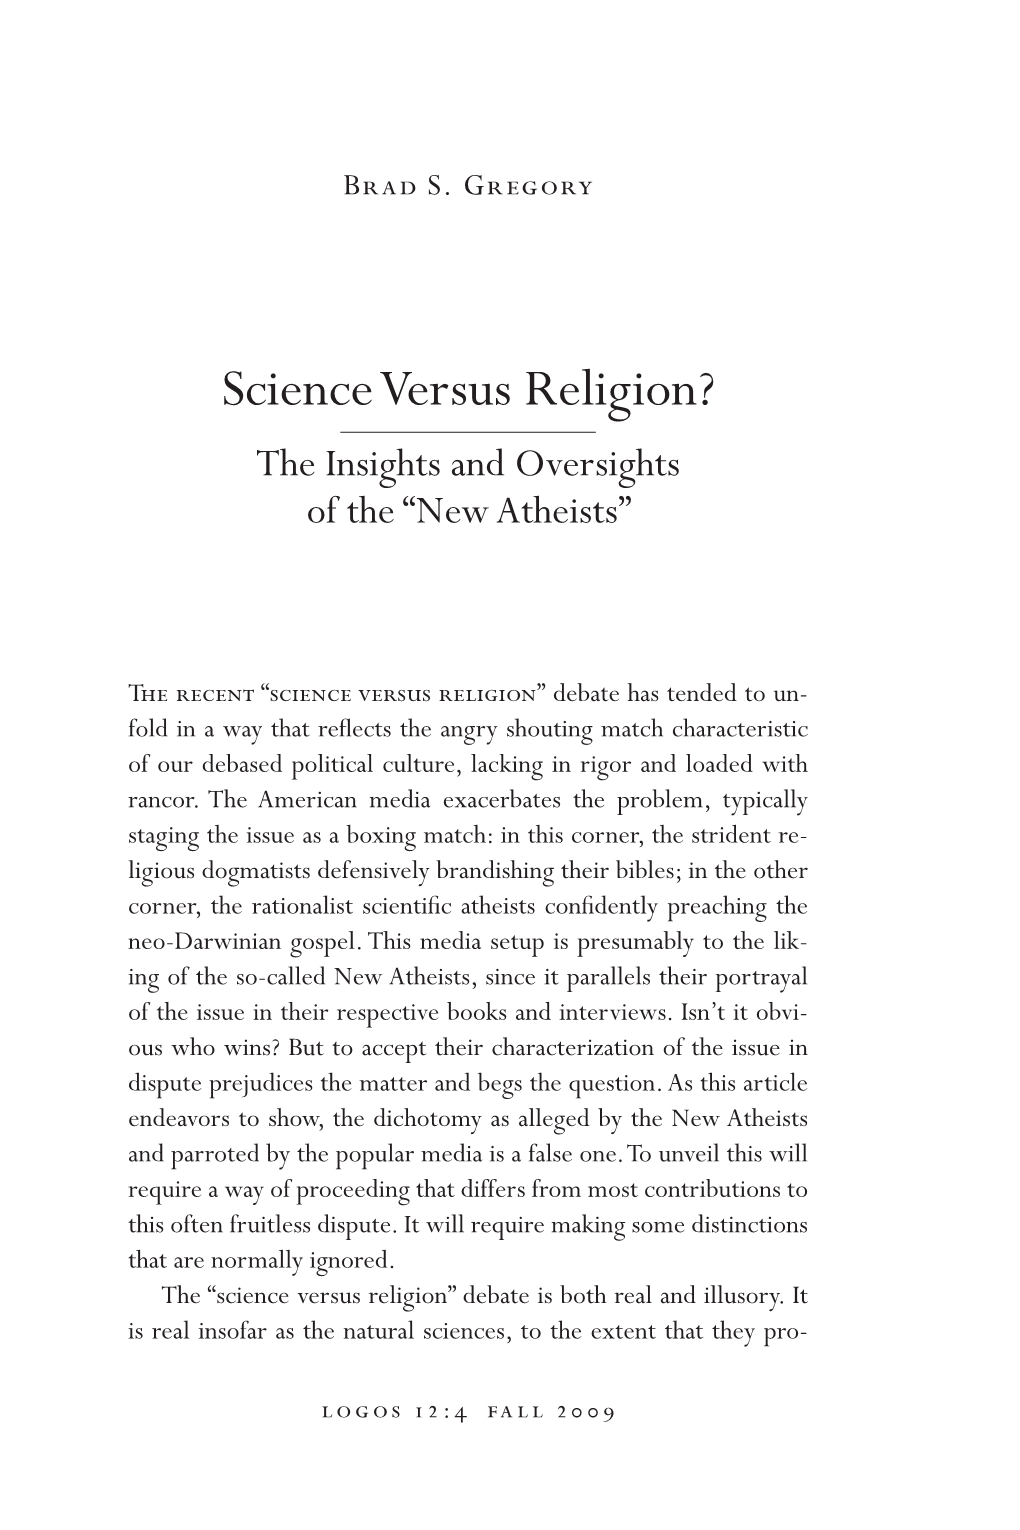 Science Versus Religion? the Insights and Oversights of the “New Atheists”